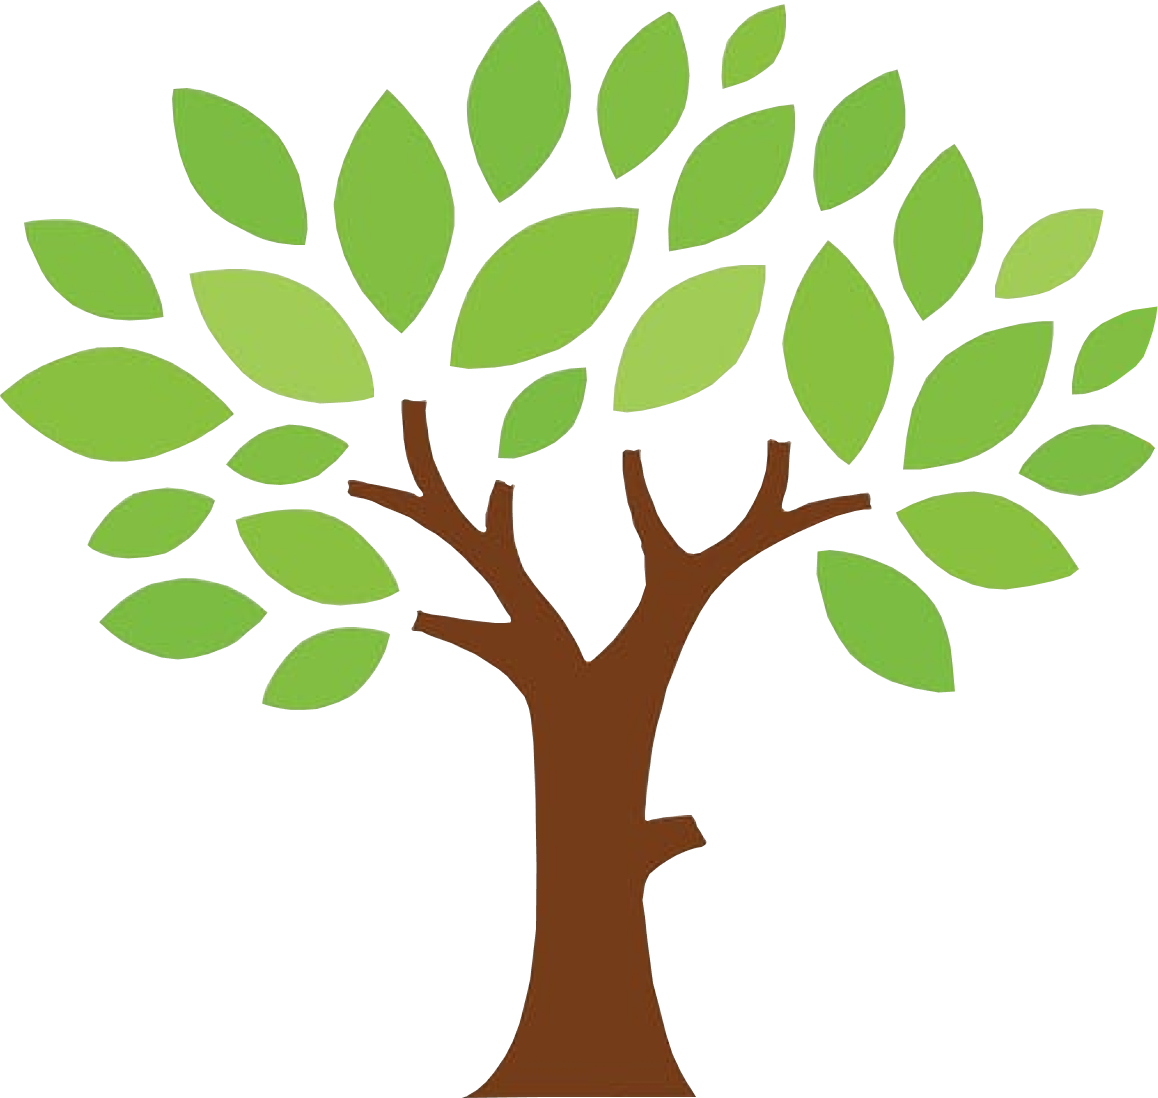 image of a small tree with green leaves which represents an orange tree in respect of the logo image of Orange Tree Car Wash and Valet